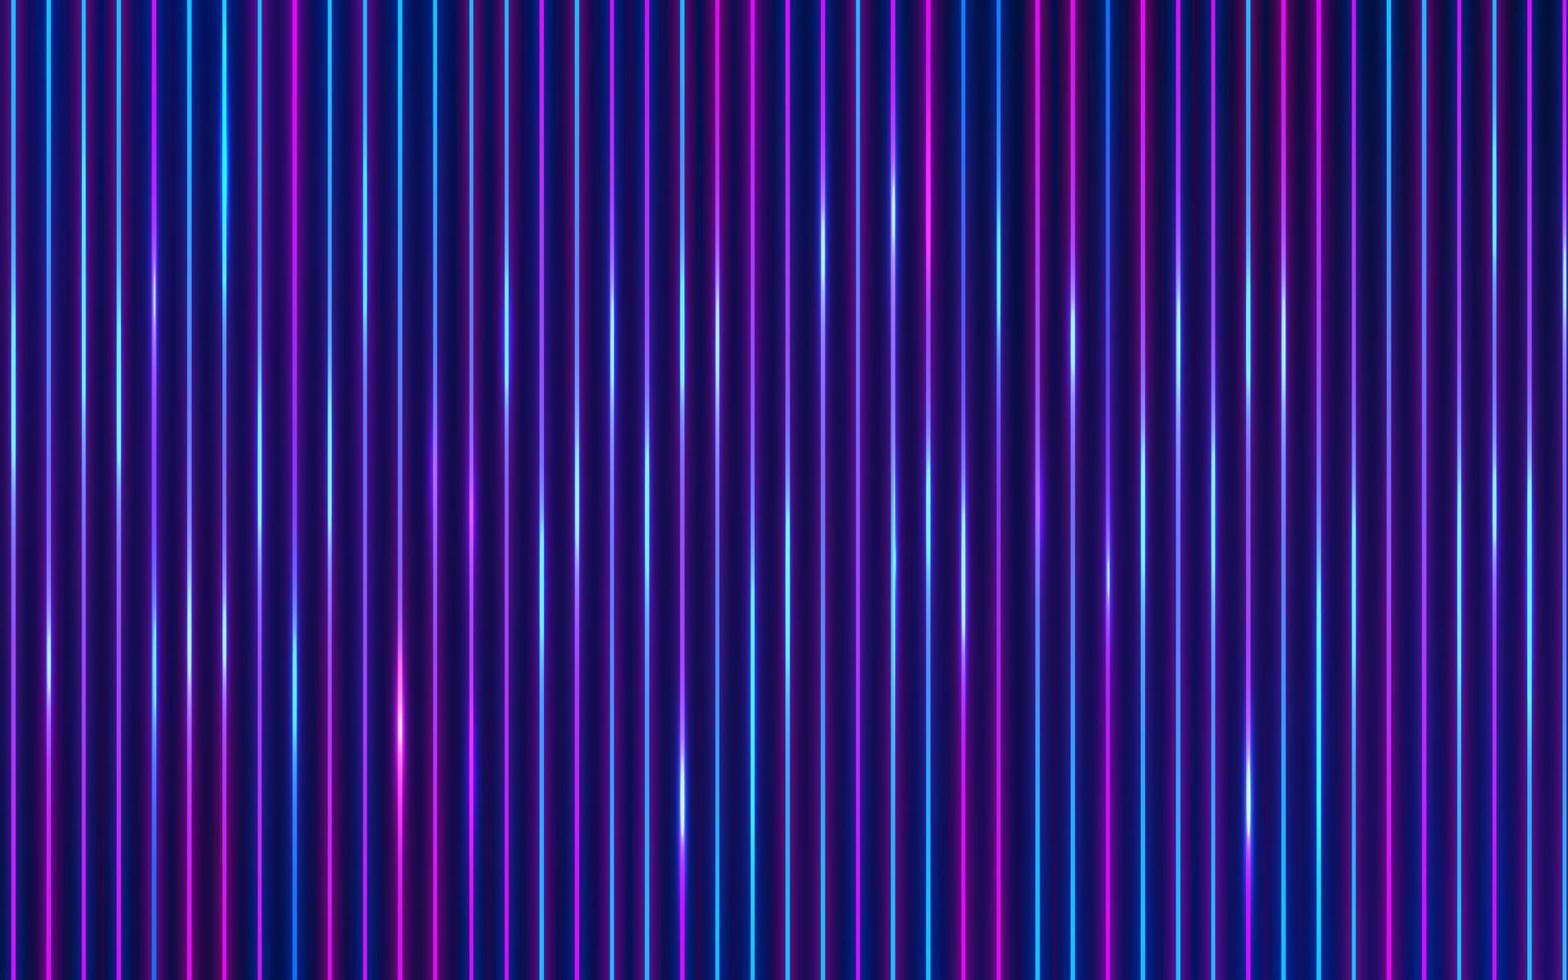 Red and blue perspective vertical glowing neon light on dark blue background. Modern futuristic template design. Abstract glowing laser lines pattern, Ultraviolet, Cyan vibrant colors. EPS10 vector